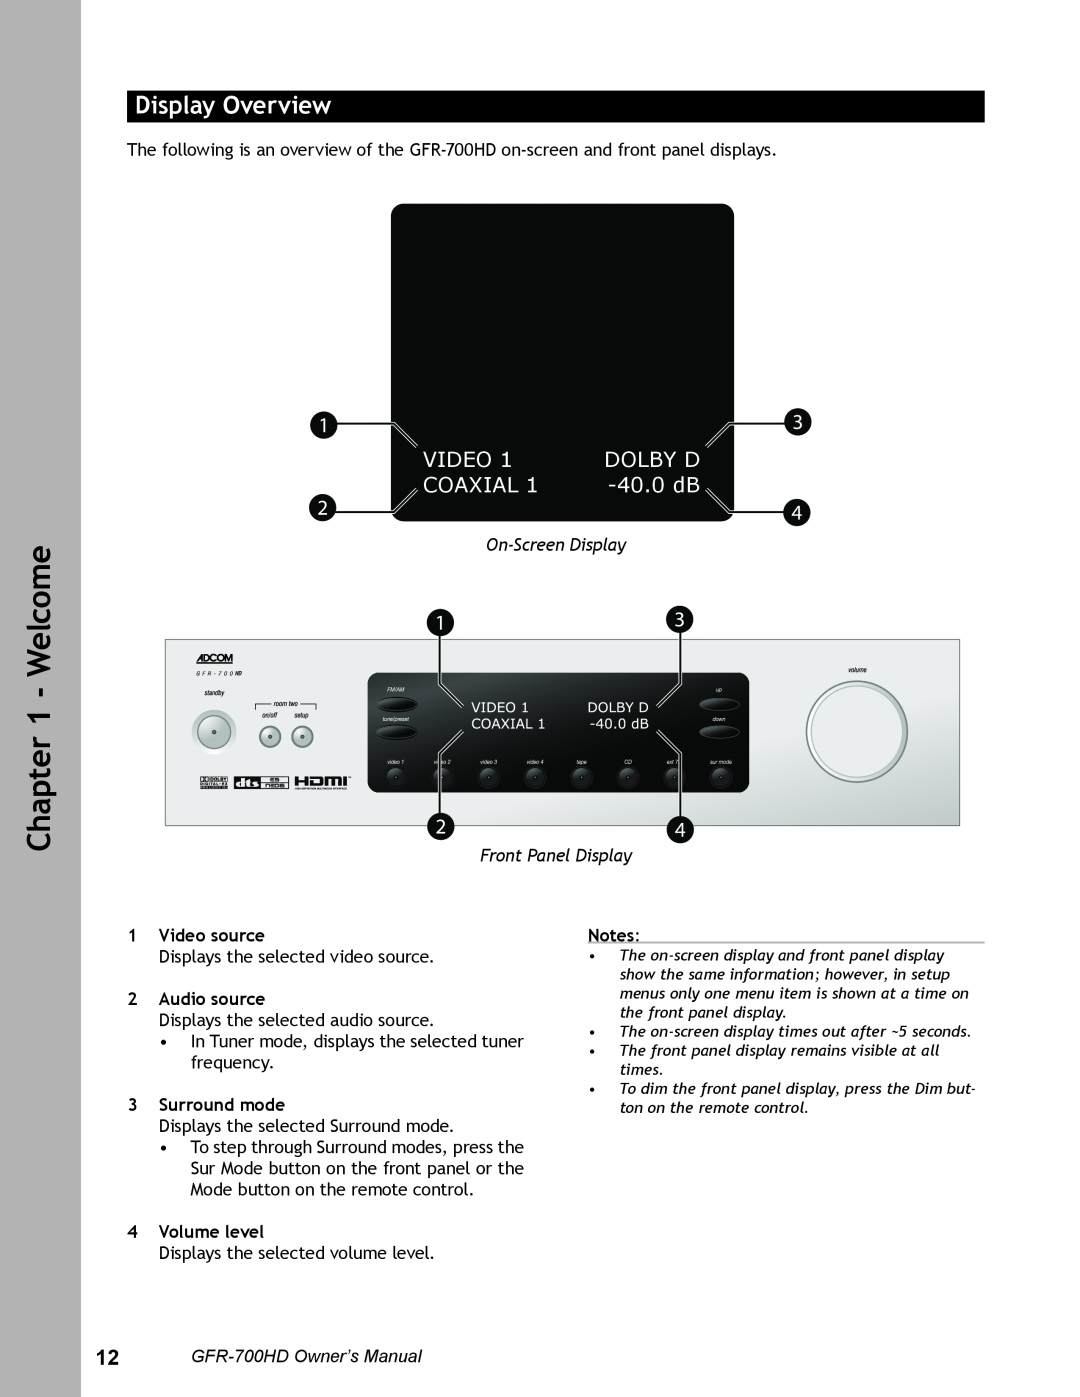 Adcom GFR-700HD Display Overview, On-ScreenDisplay Front Panel Display, 1Video source, 2Audio source, 3Surround mode 